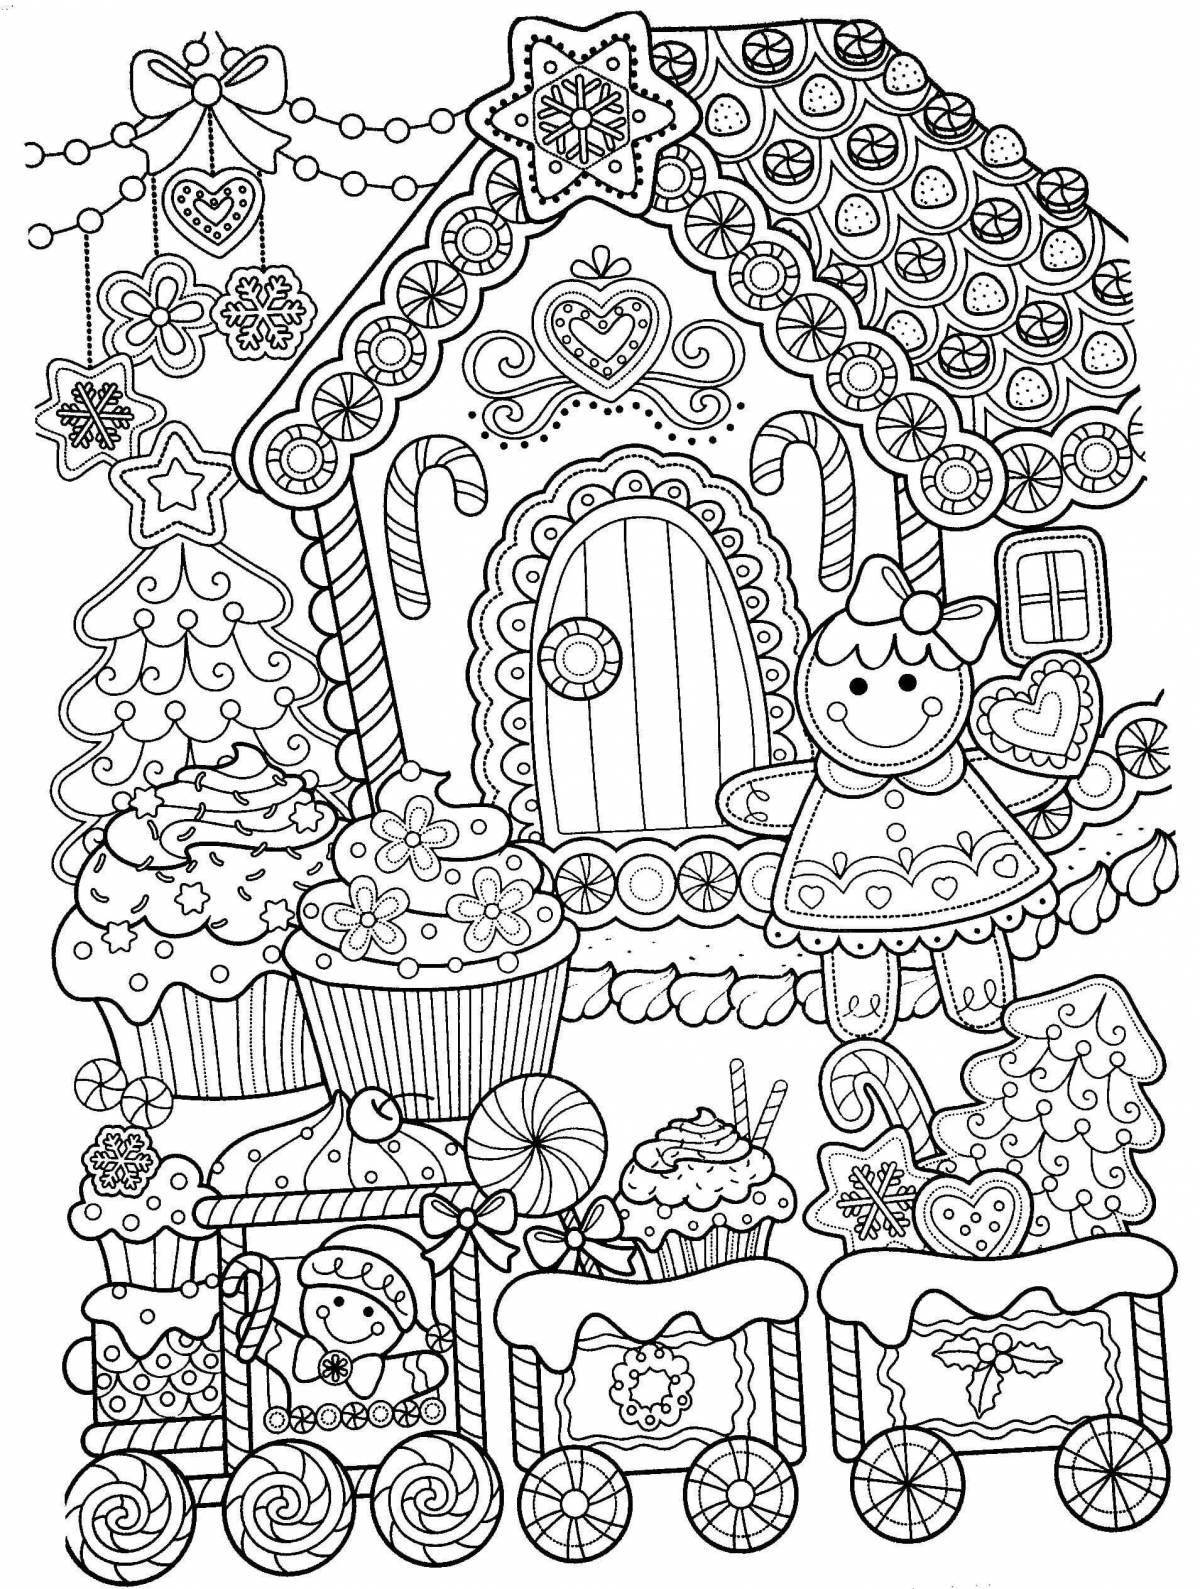 Radiant coloring page antistress christmas